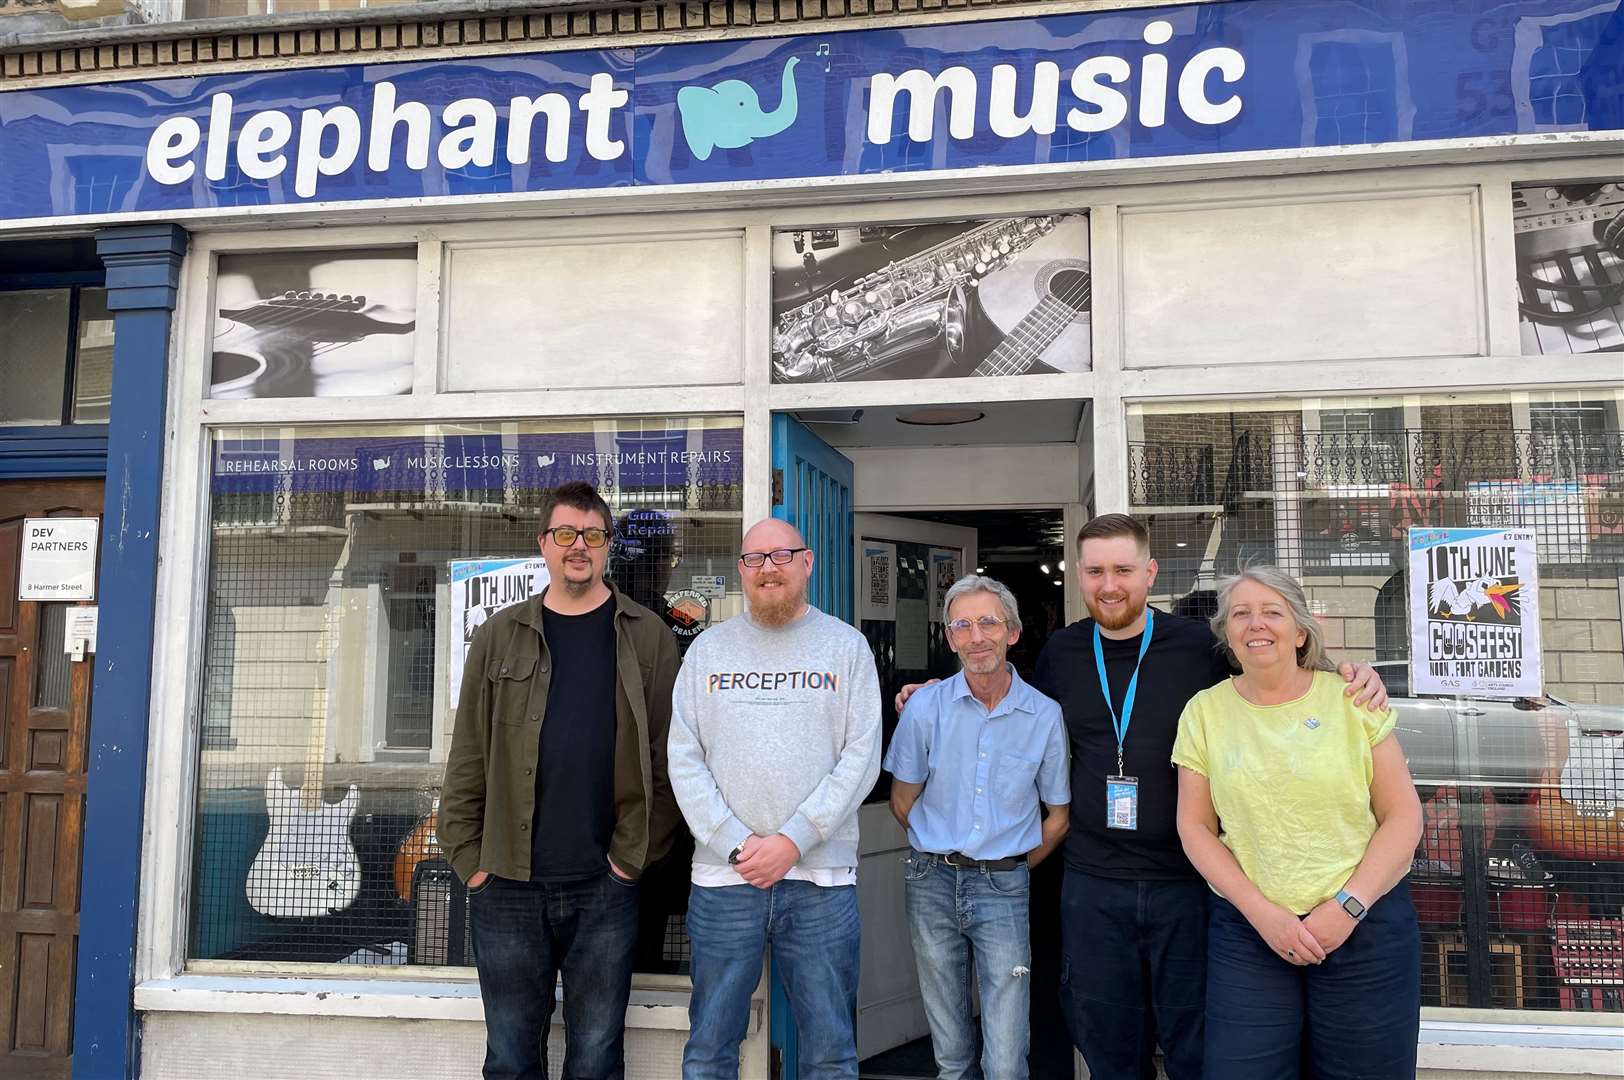 Elephant Music saw a demand for records and opened a vinyl section to the shop